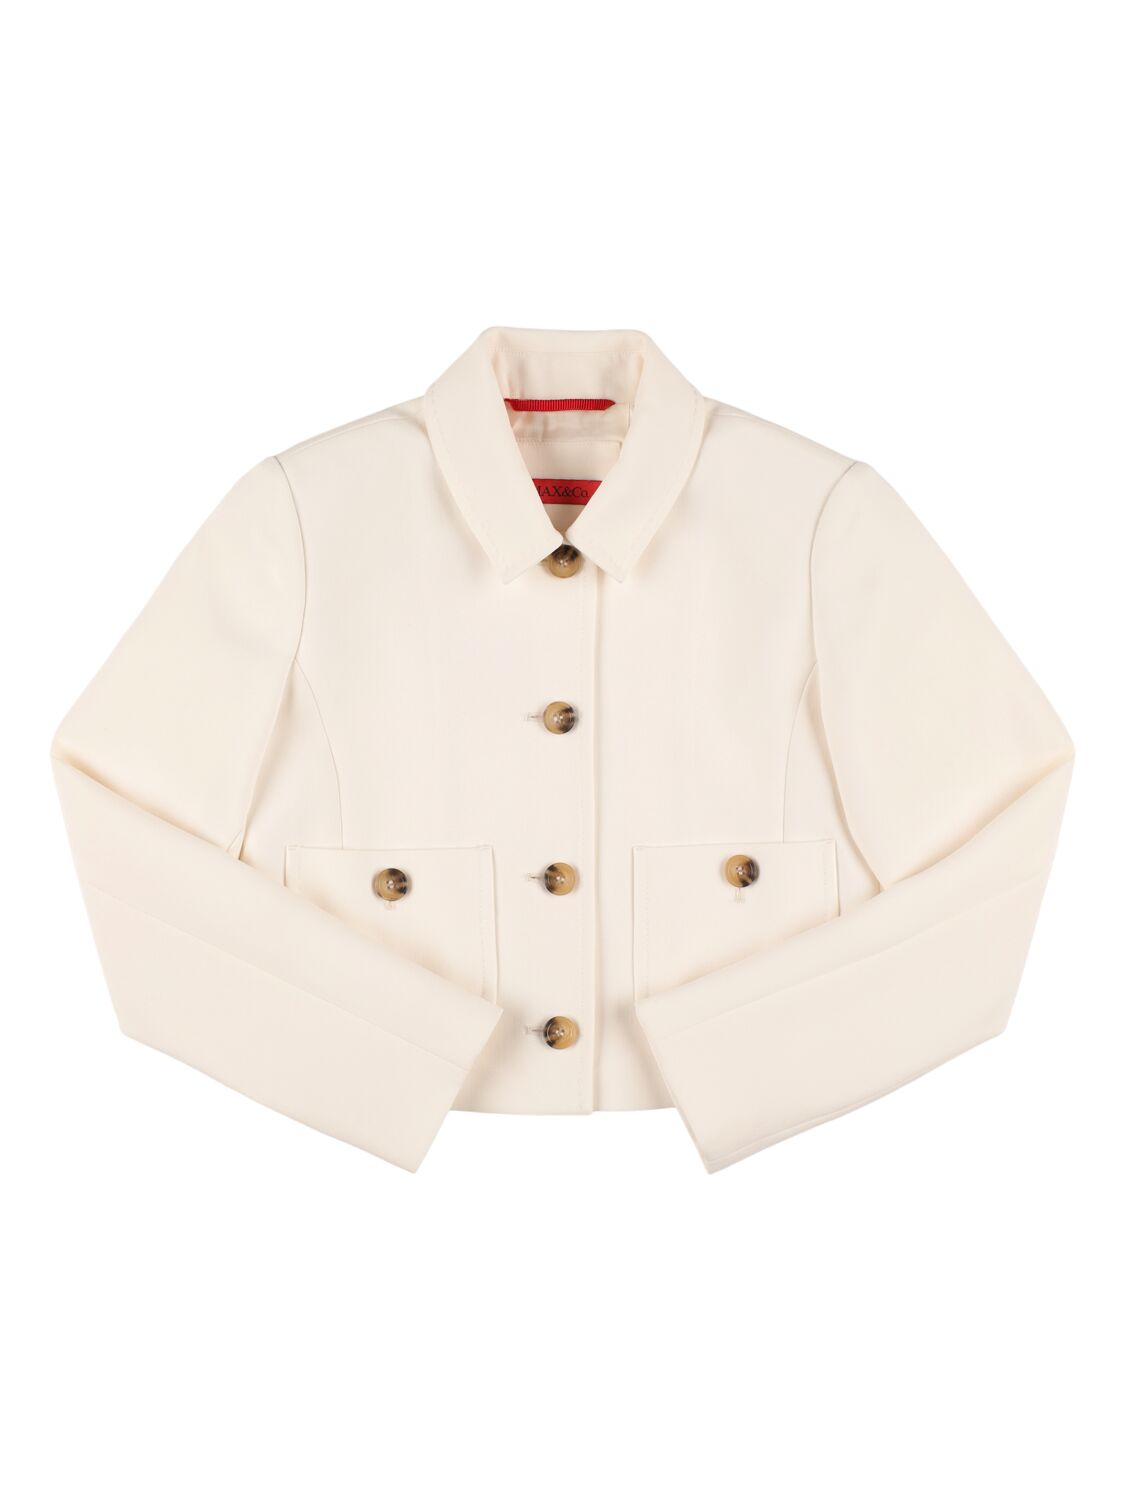 Max & Co Kids' Spread-collar Shirt Jacket In White